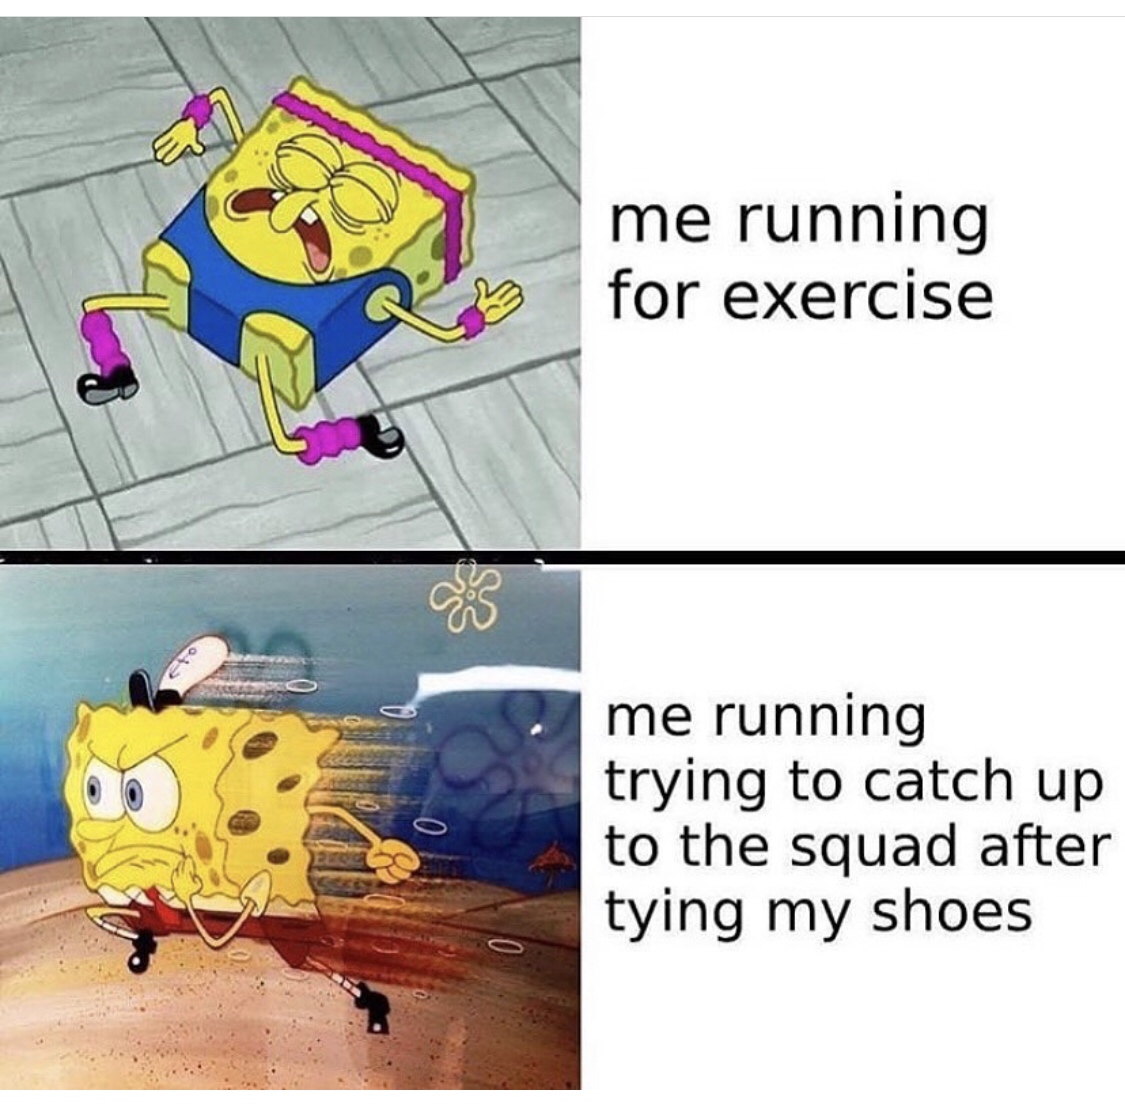 me and the squad memes - me running for exercise Q . me running trying to catch up to the squad after tying my shoes